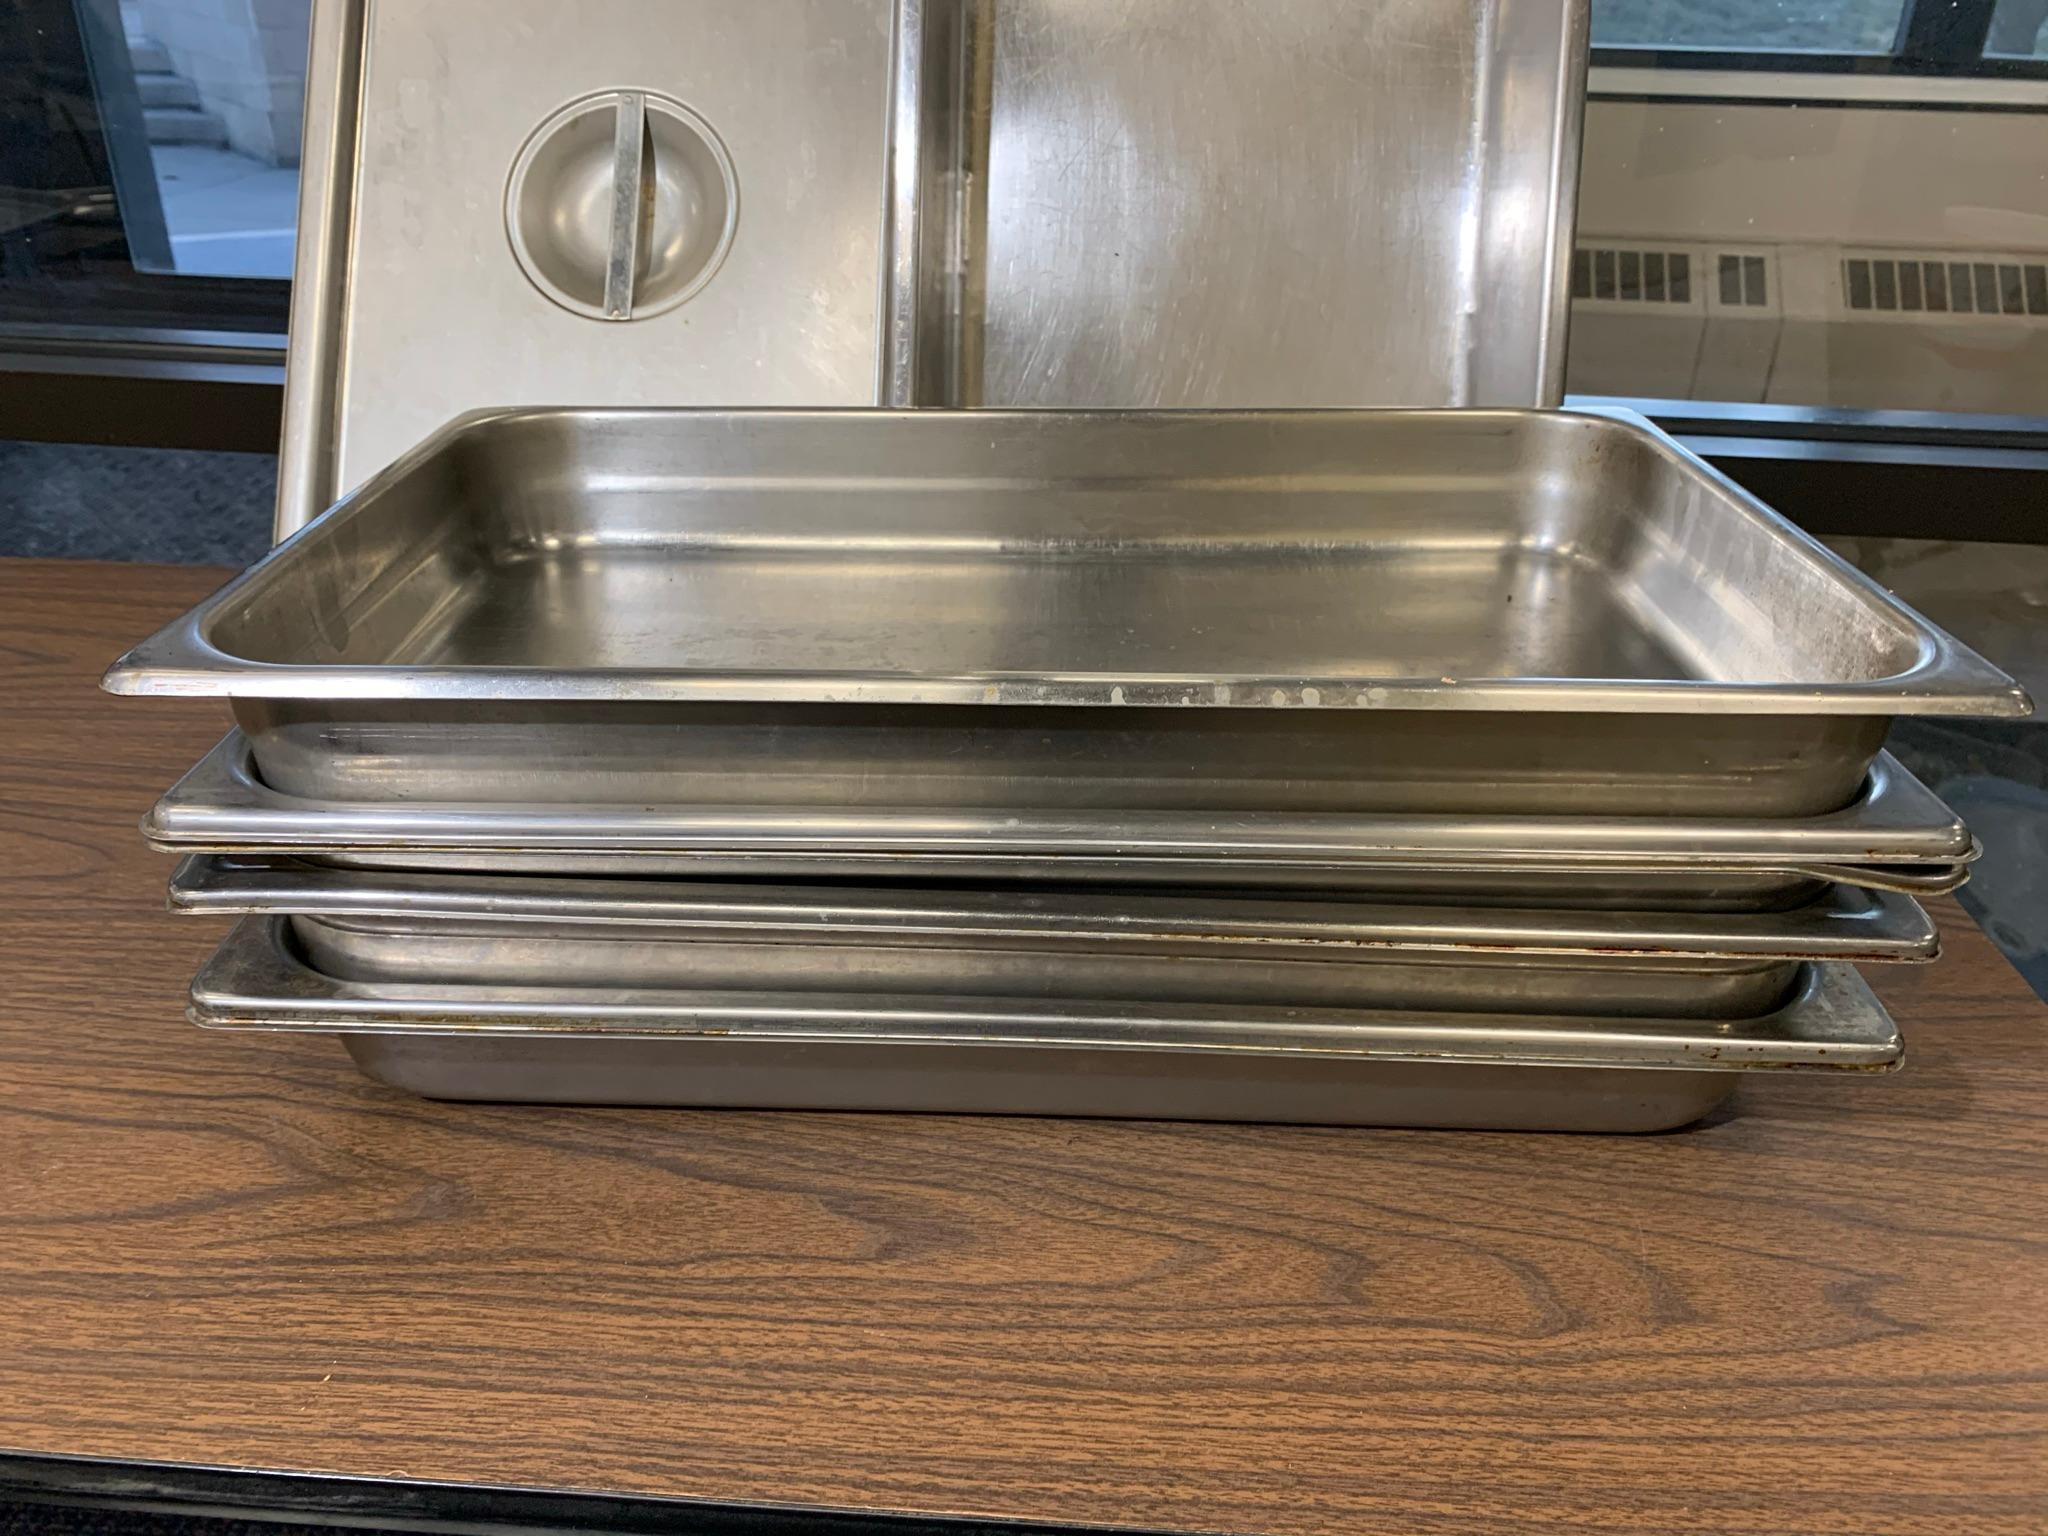 7 Stainless Steel NSF Steam Table Pans Including 1 Stainless Steel Lid